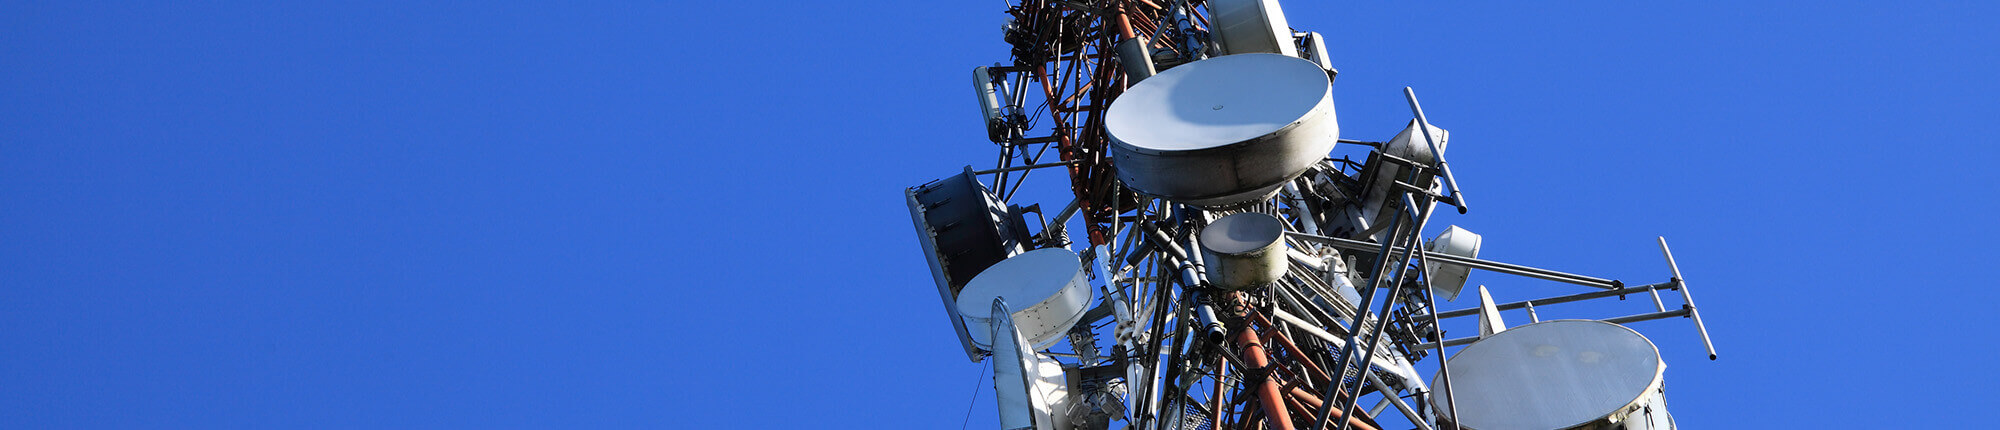 Cell phone towers on unstable ground need helical piering for stability.